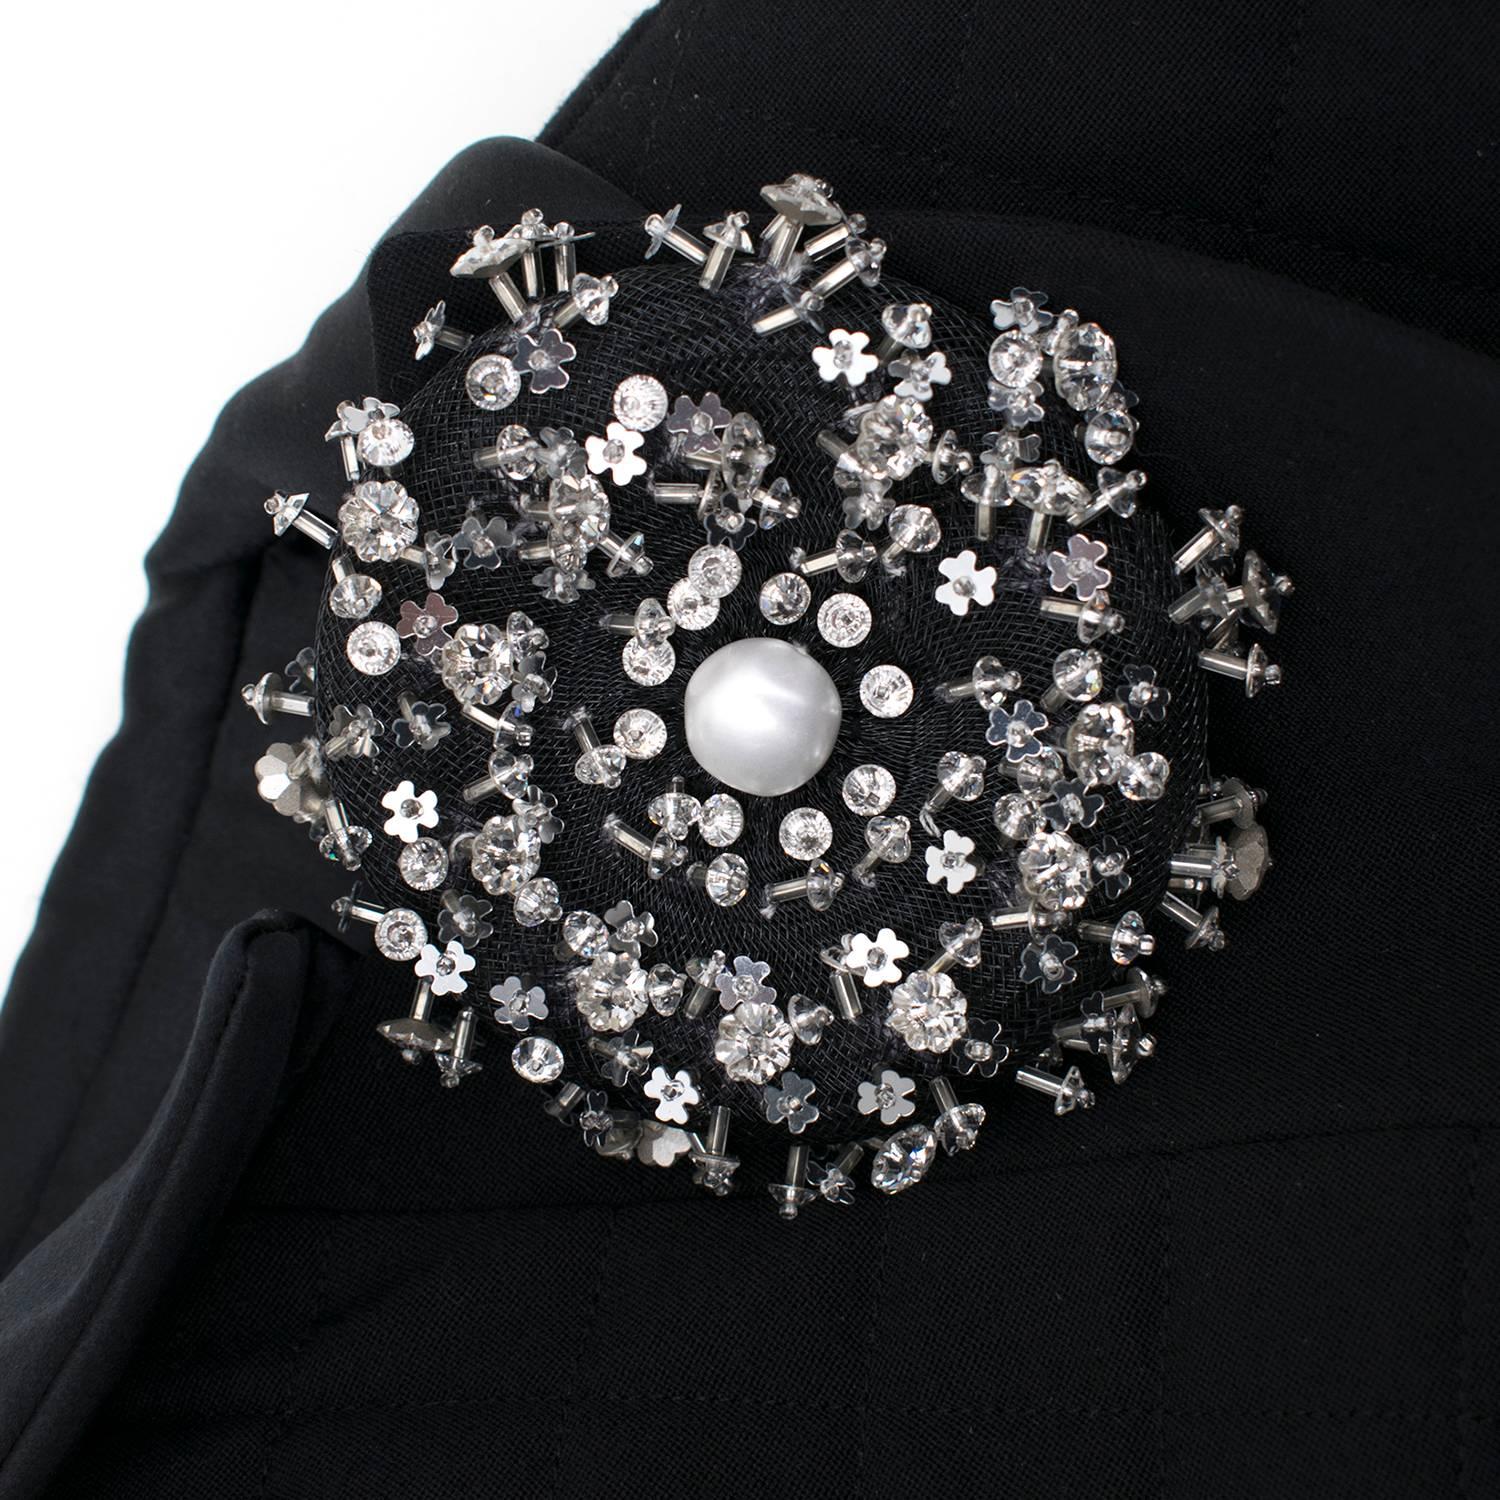 Chanel Jacket and skirt suit with embellished brooch 
Vertical button fastening along Jacket
Brooch covered with silver embellishment.

Fabric: Laine Wool, Soie Silk. 

Size: M. 

Jacket:
Shoulders- 9cm
Chest- 51 cm
Sleeves- 55cm
Length-